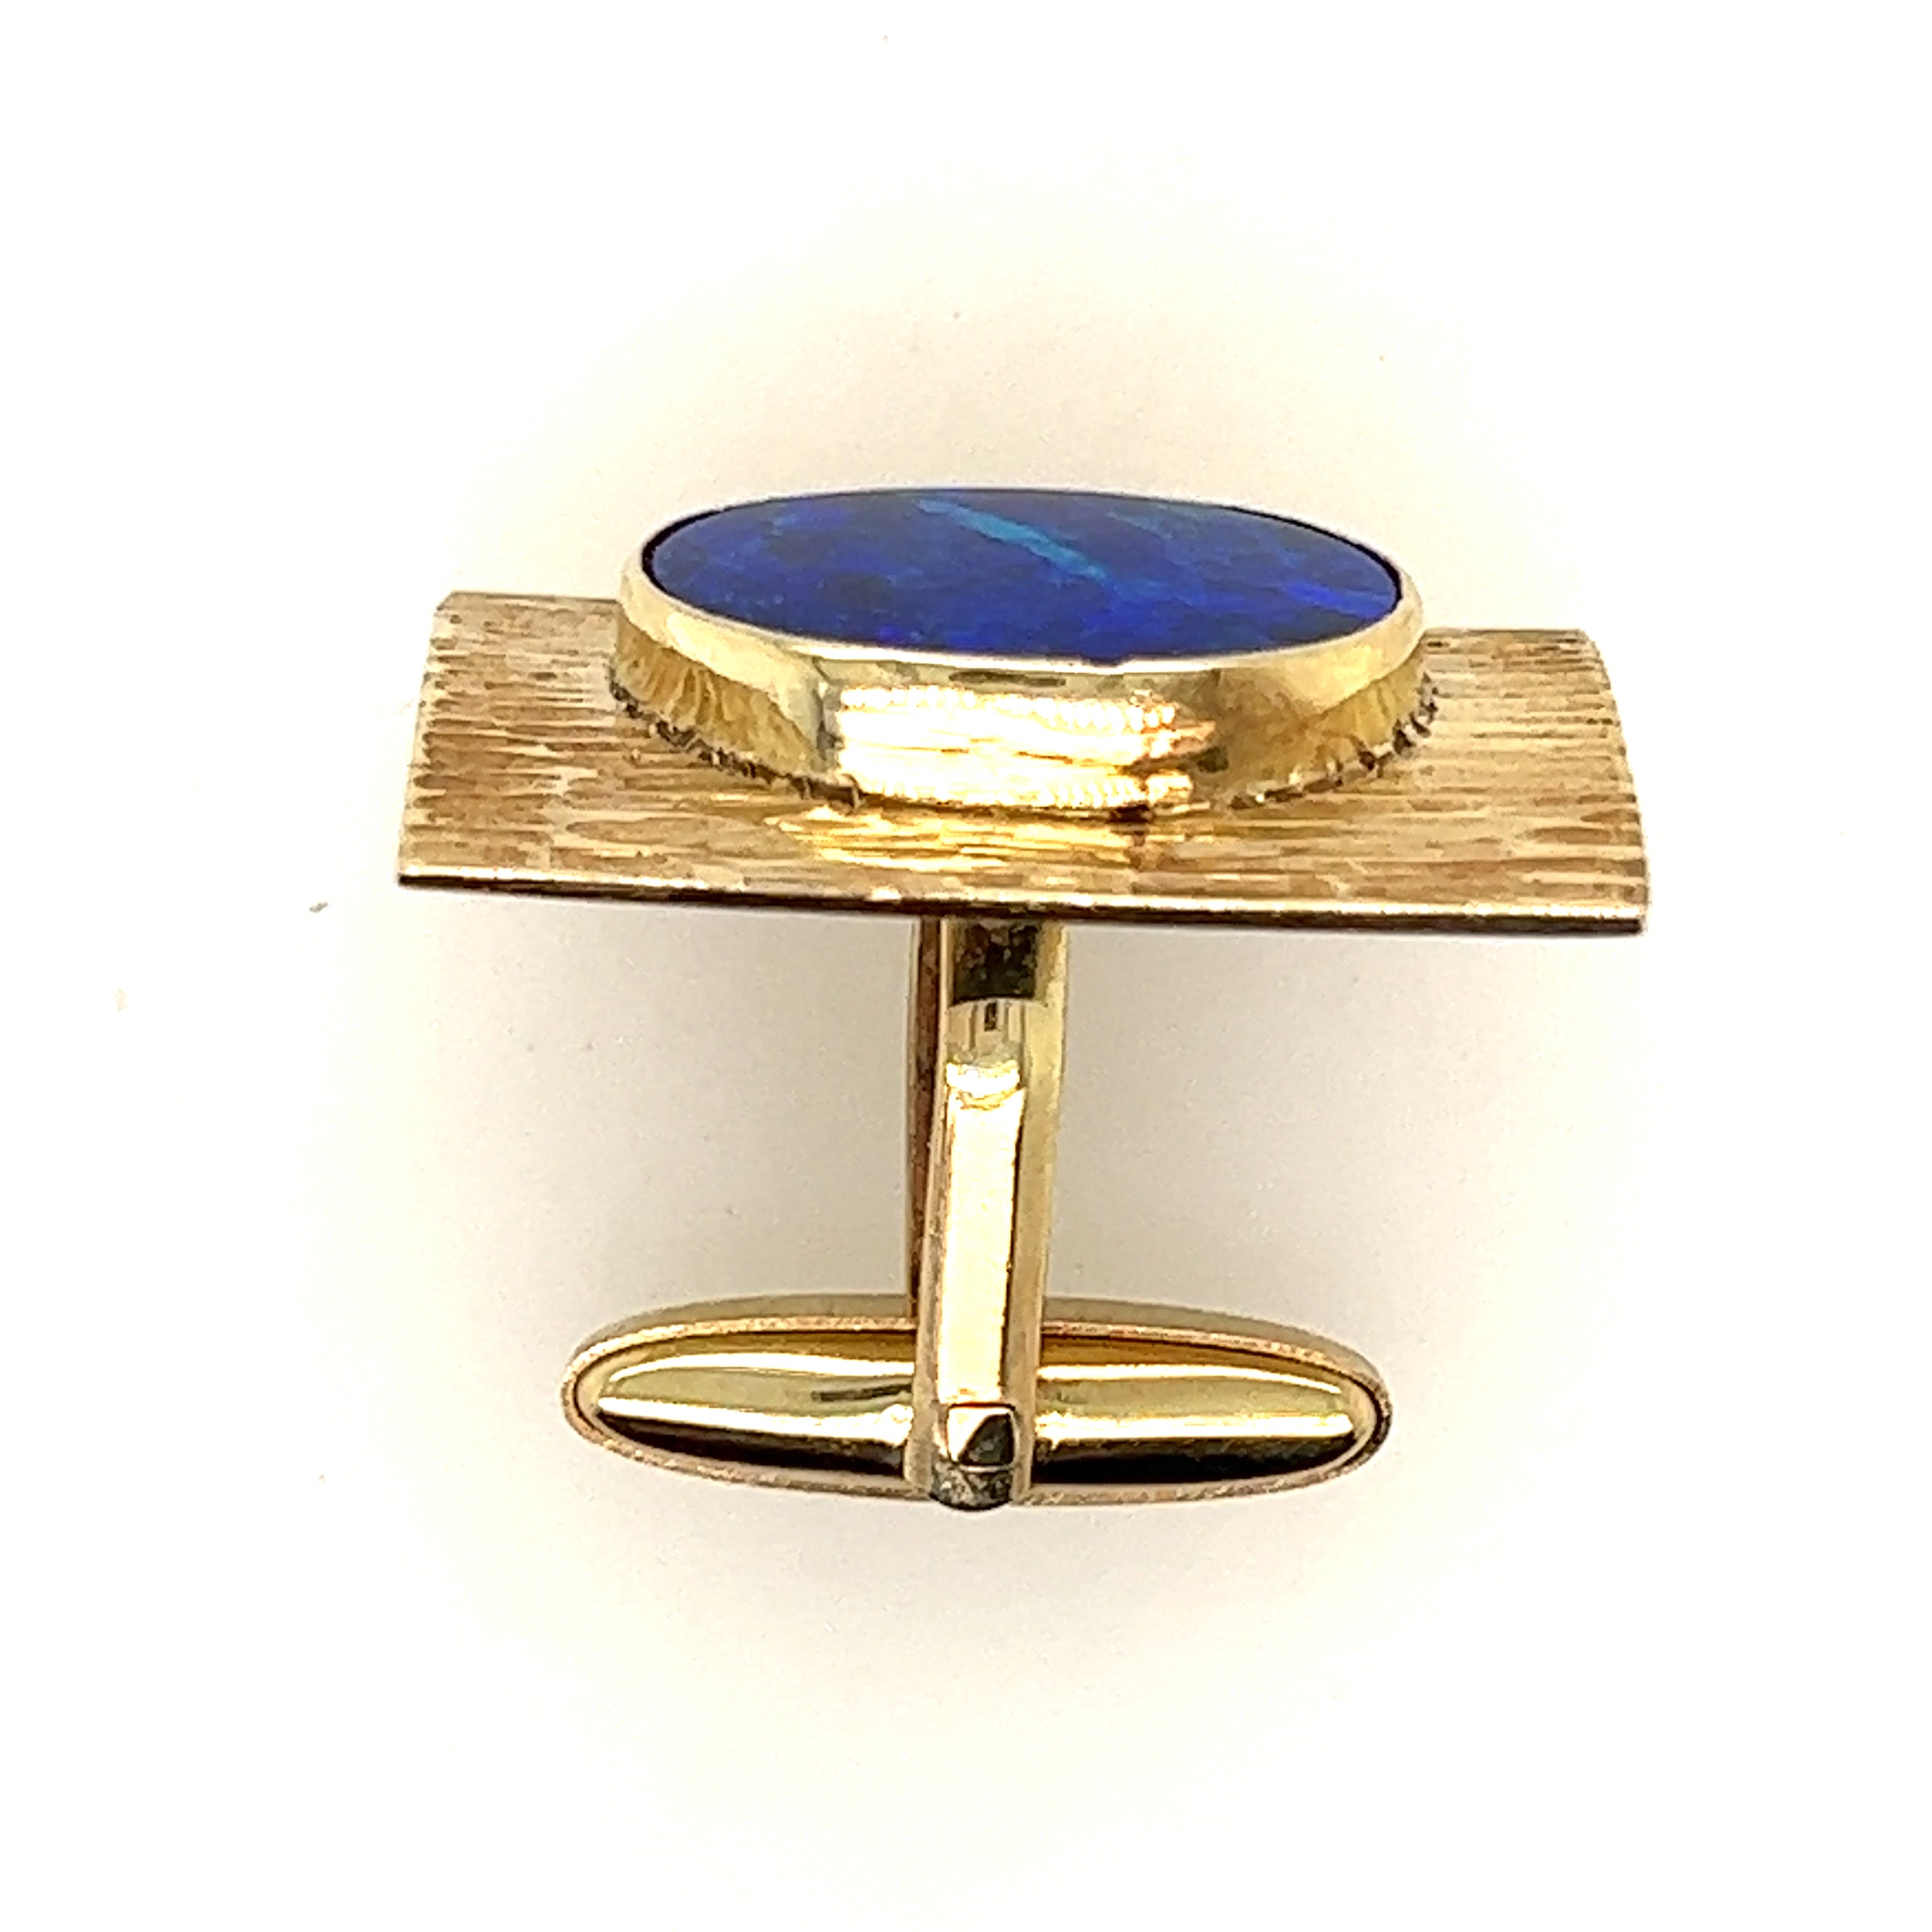 Opal cuff links set in 9ct yellow gold.